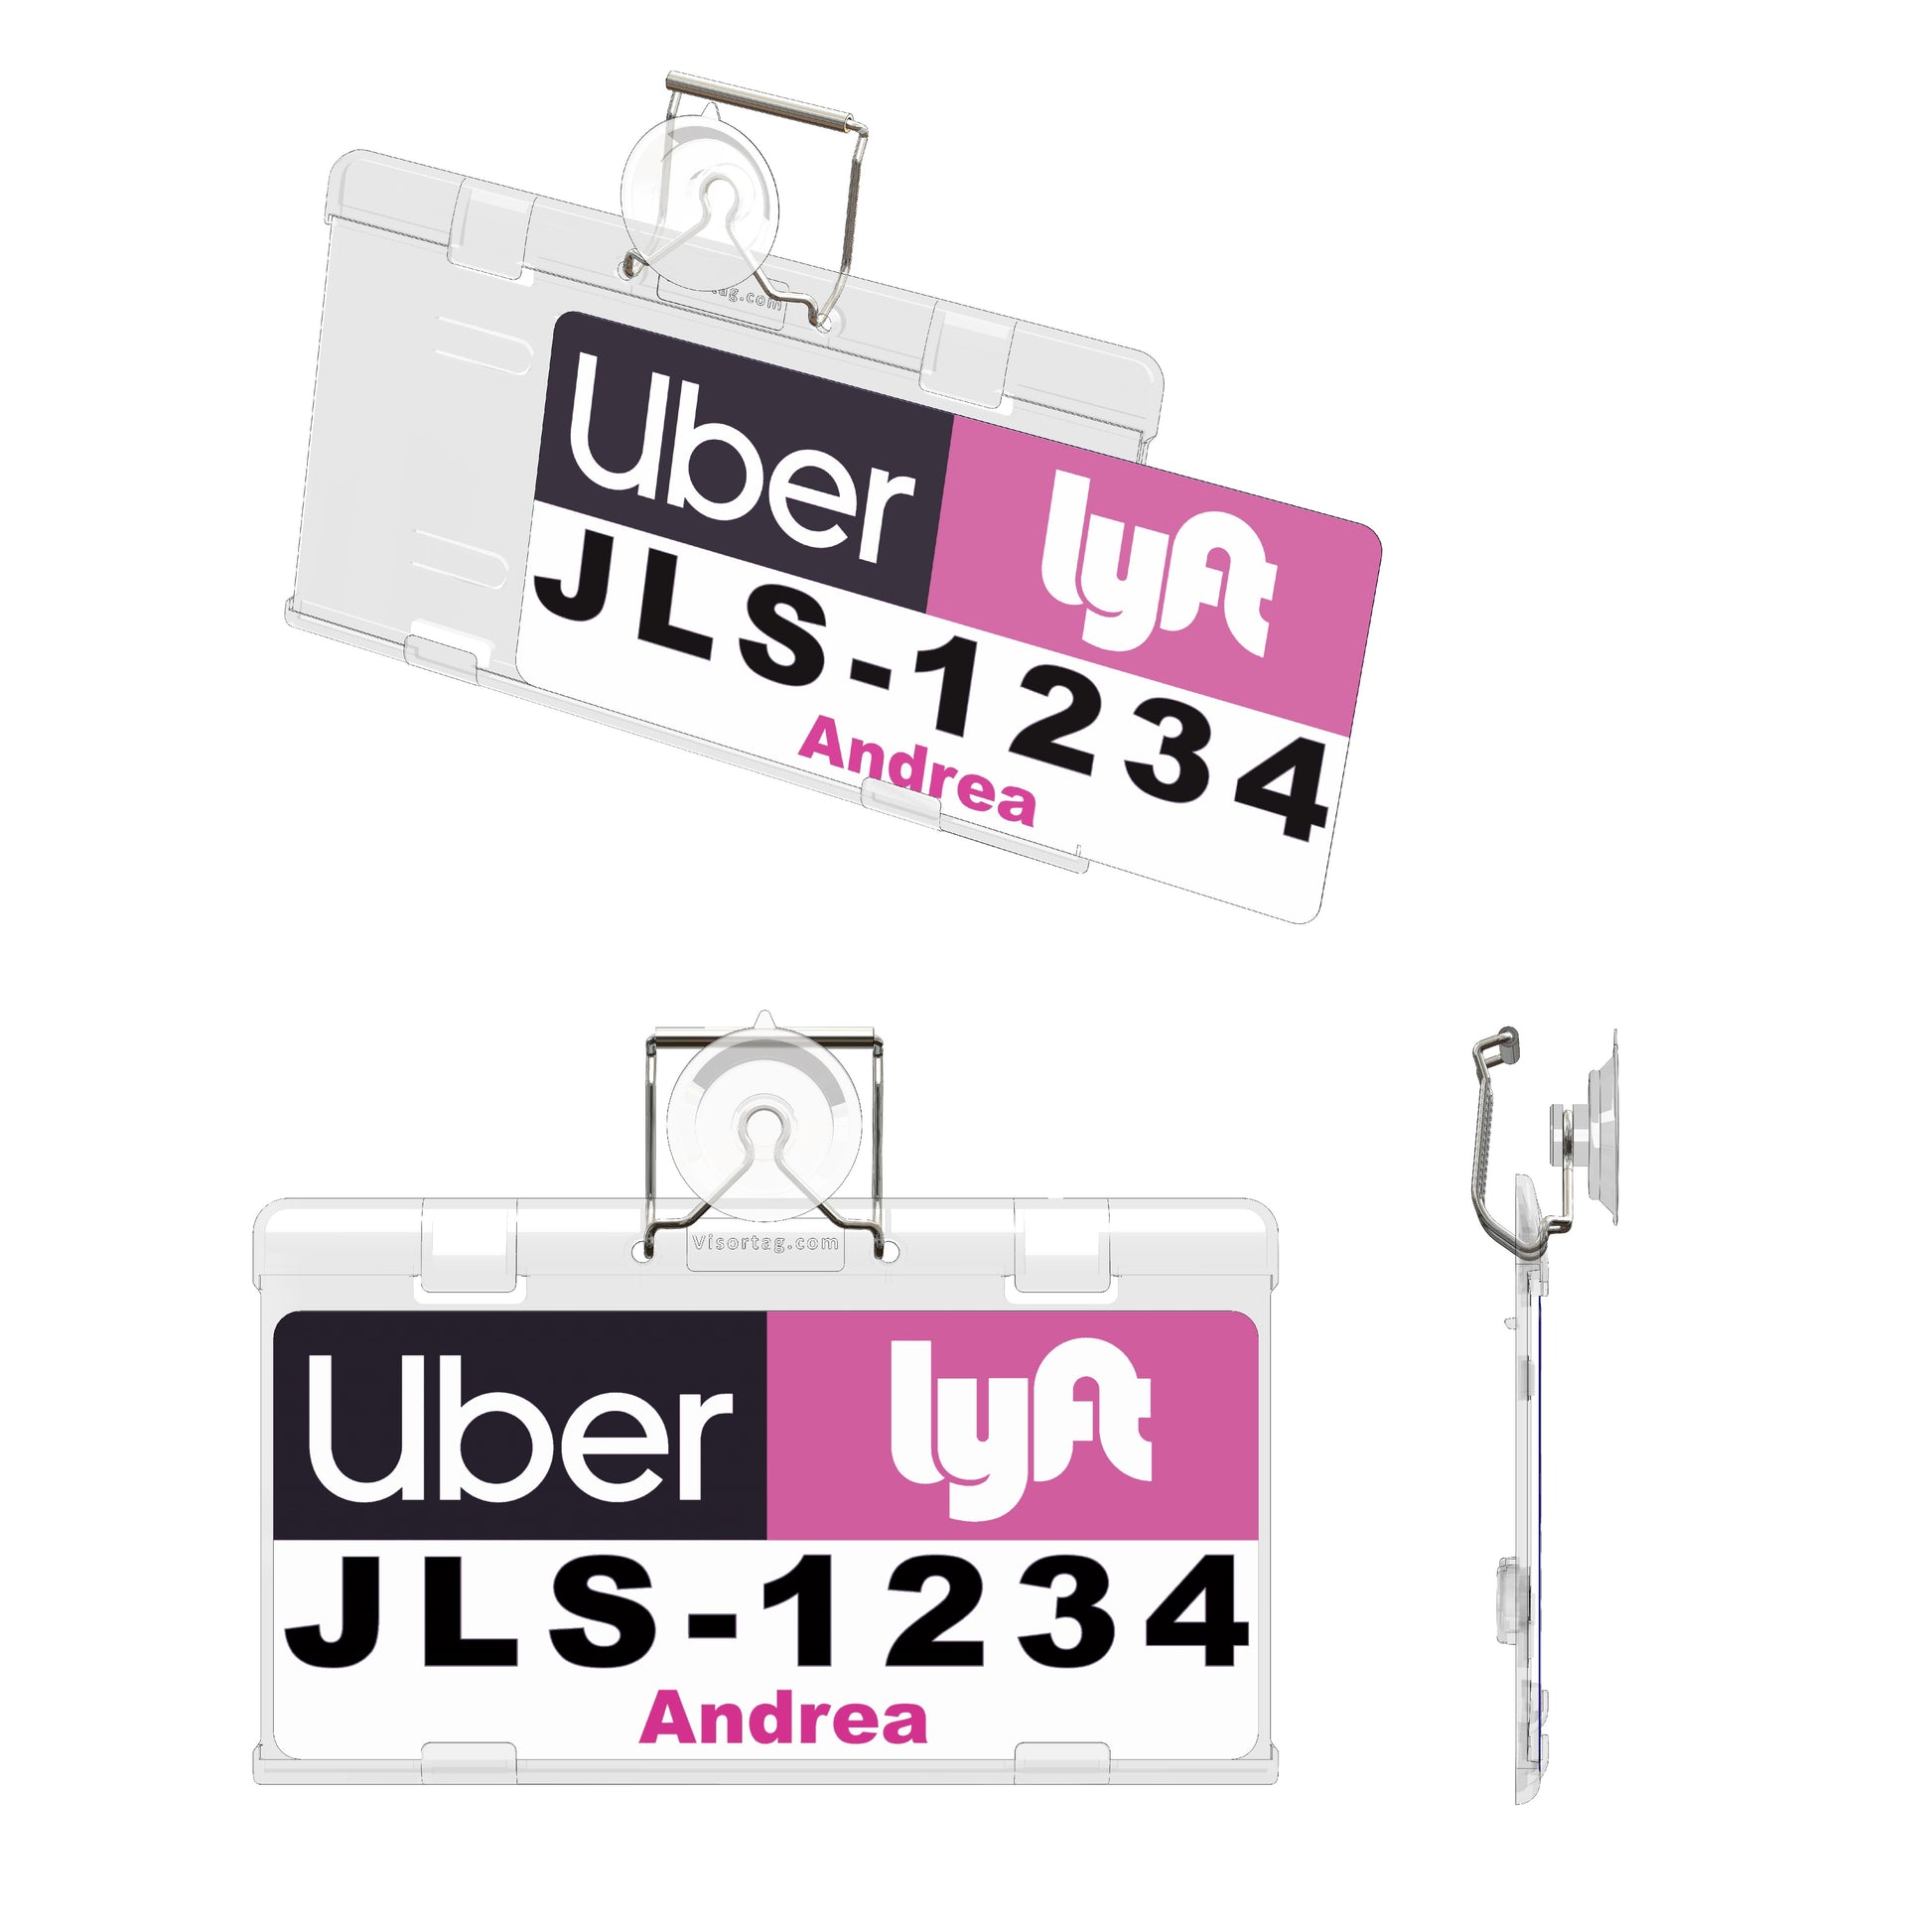 Uber and Lyft sign holder and protector. Easy to display and remove. Taxi and rideshare drivers. Made in USA